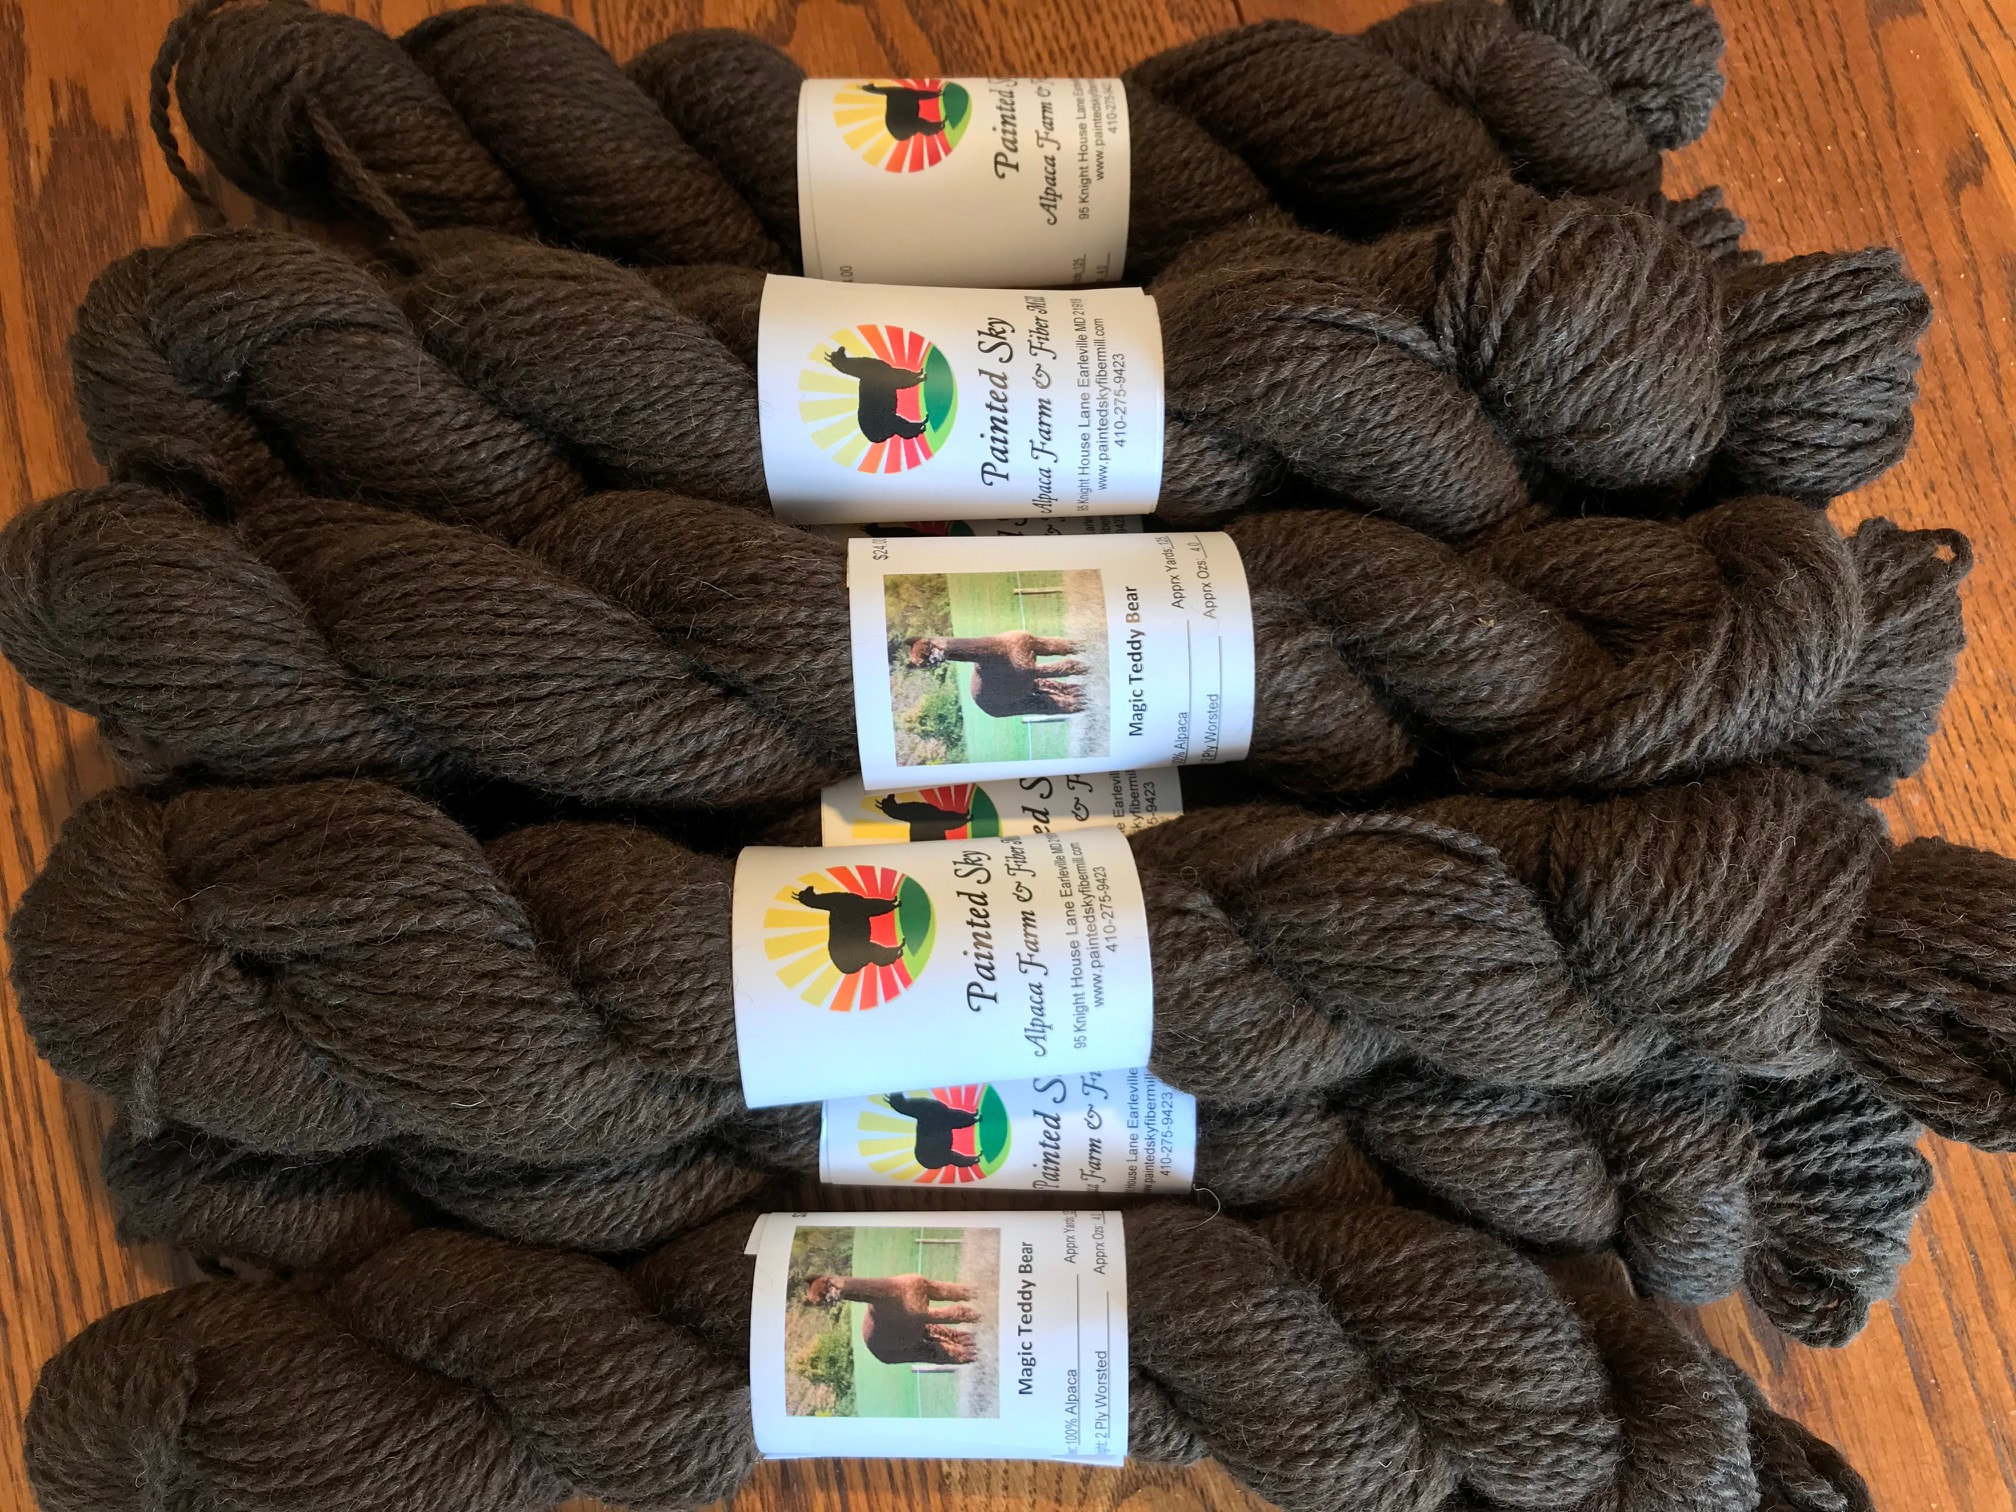 100% Alpaca Worsted Weight Yarns in Natural Colors